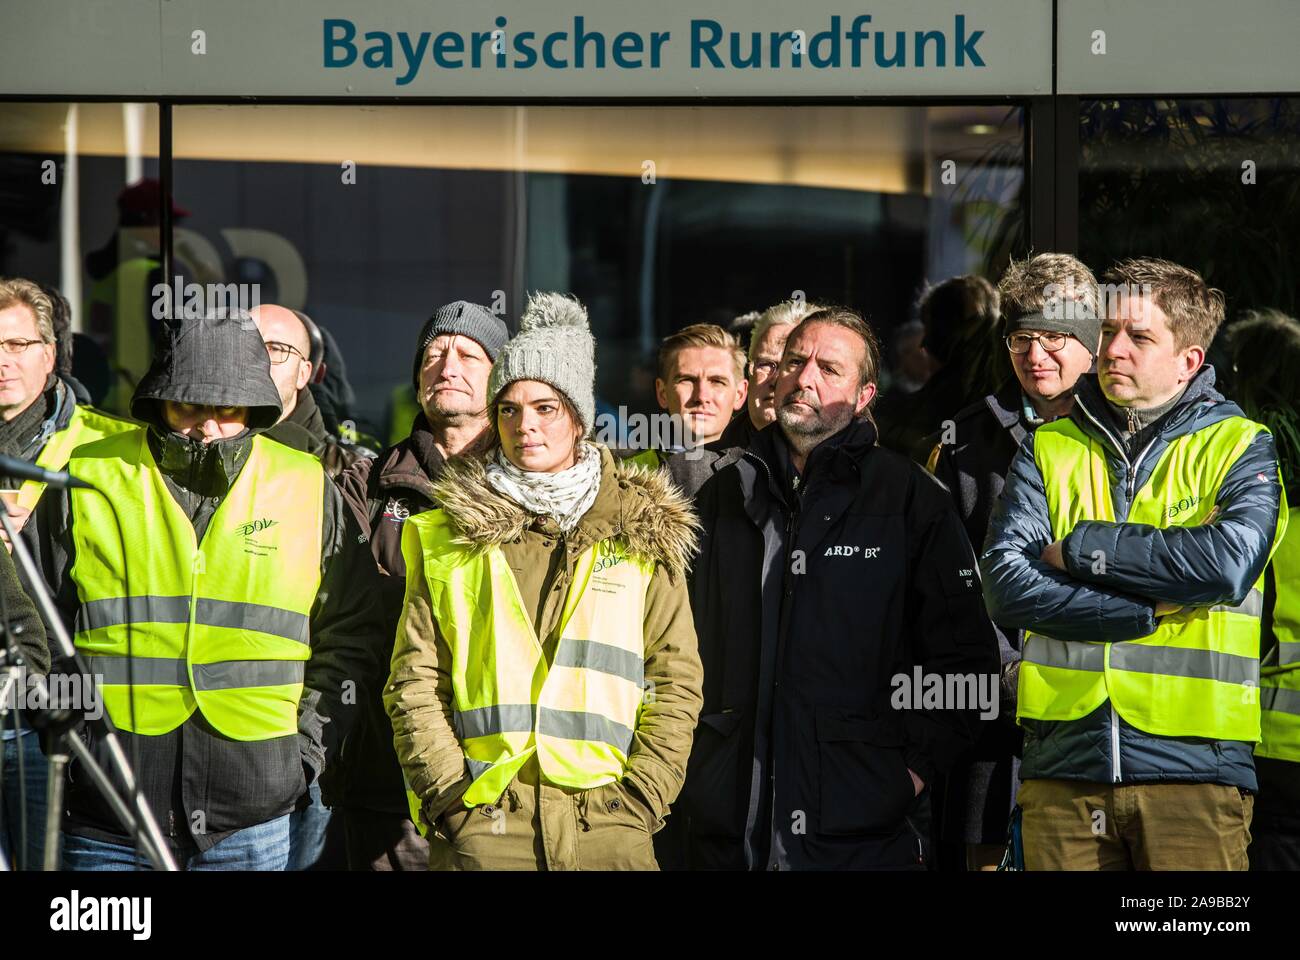 Munich, Bavaria, Germany. 14th Nov, 2019. Demanding a raise of 7, 8% over 33 months, along with increases of payments, licenses, and other payouts, the Bavarian Journalist Union (Bayerischer Journalisten Verband) called for another 48-hour strike against the Bayerischer Rundfunk media house in Munich. The strike encompasses journalists, redaction/editorial staff, and those in related roles with at least 350 in attendance at the Munich location. Credit: ZUMA Press, Inc./Alamy Live News Stock Photo